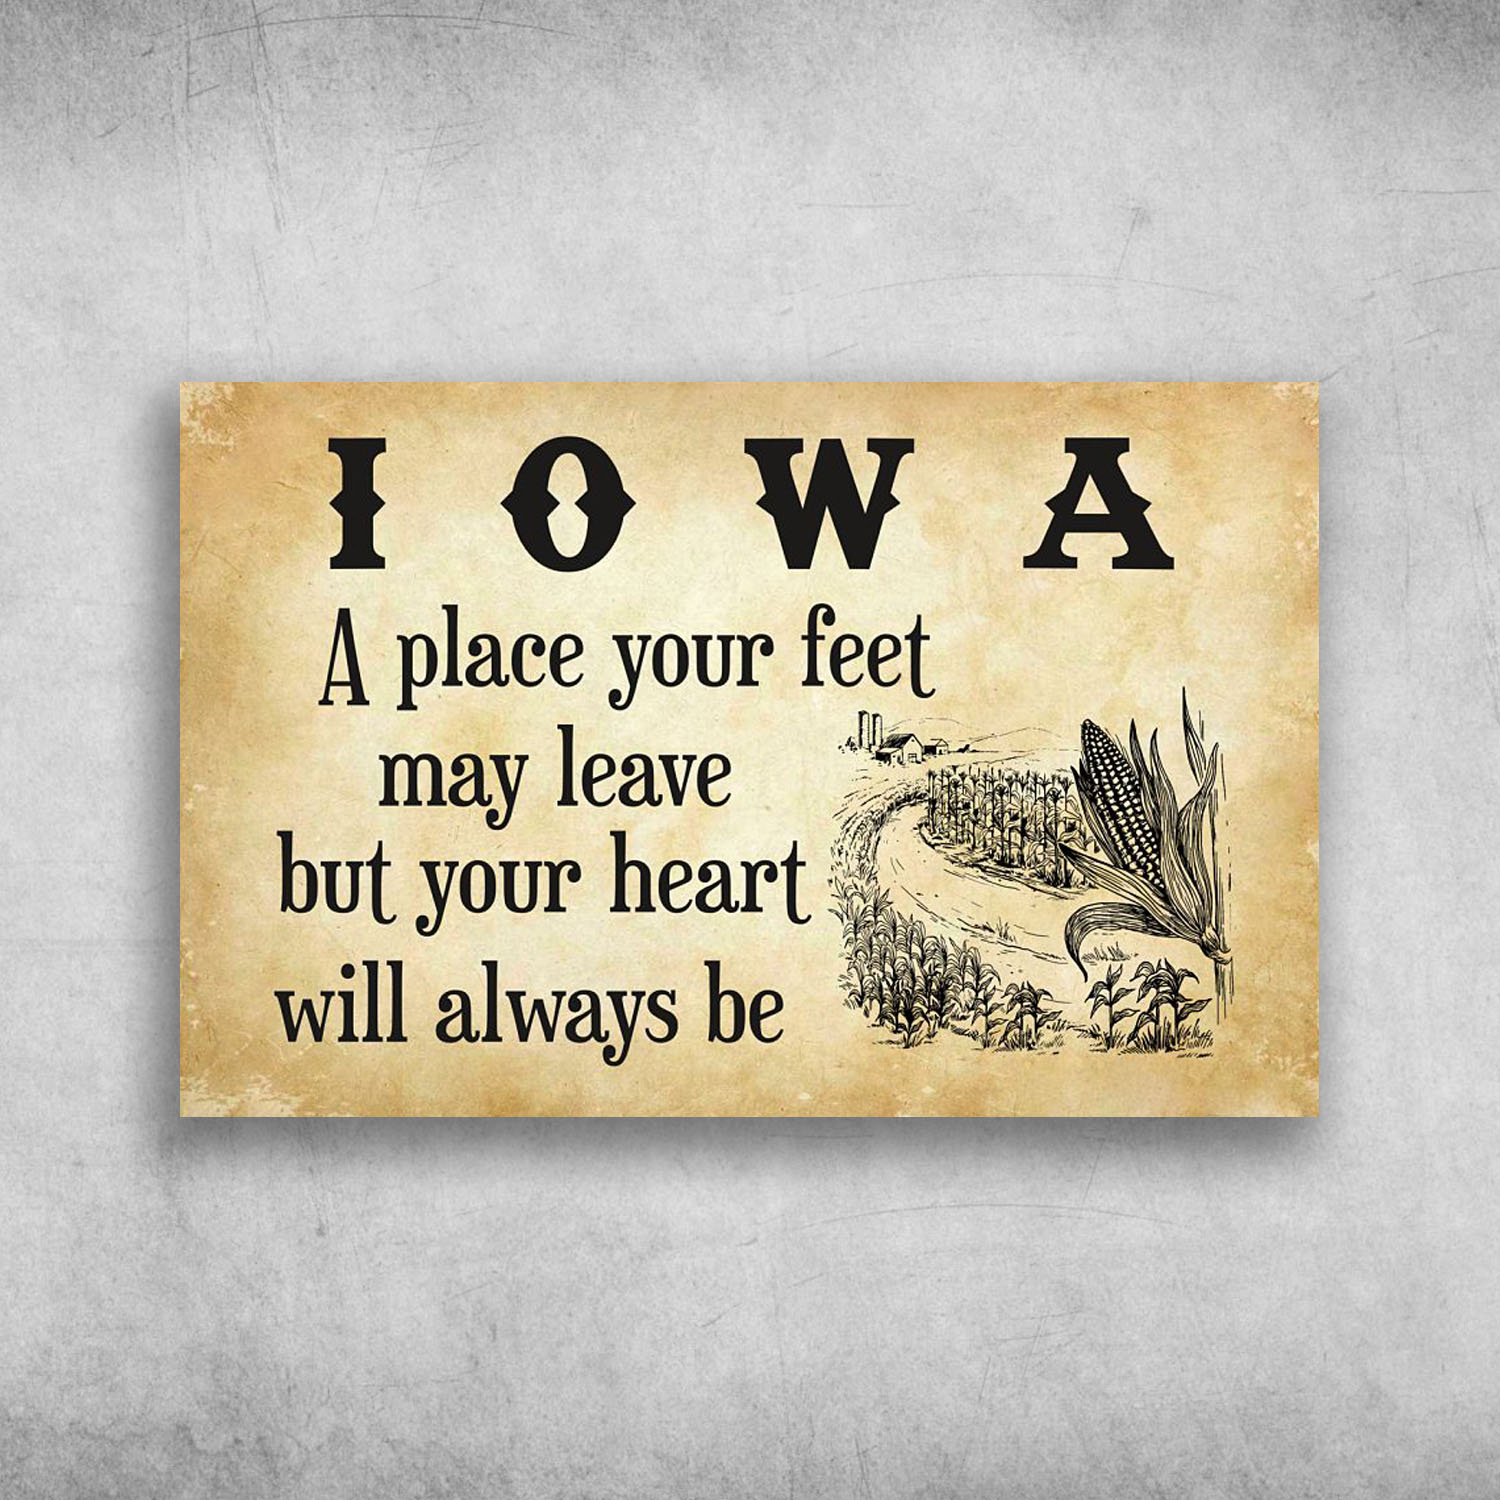 Iowa A Place Your Feet May Leave